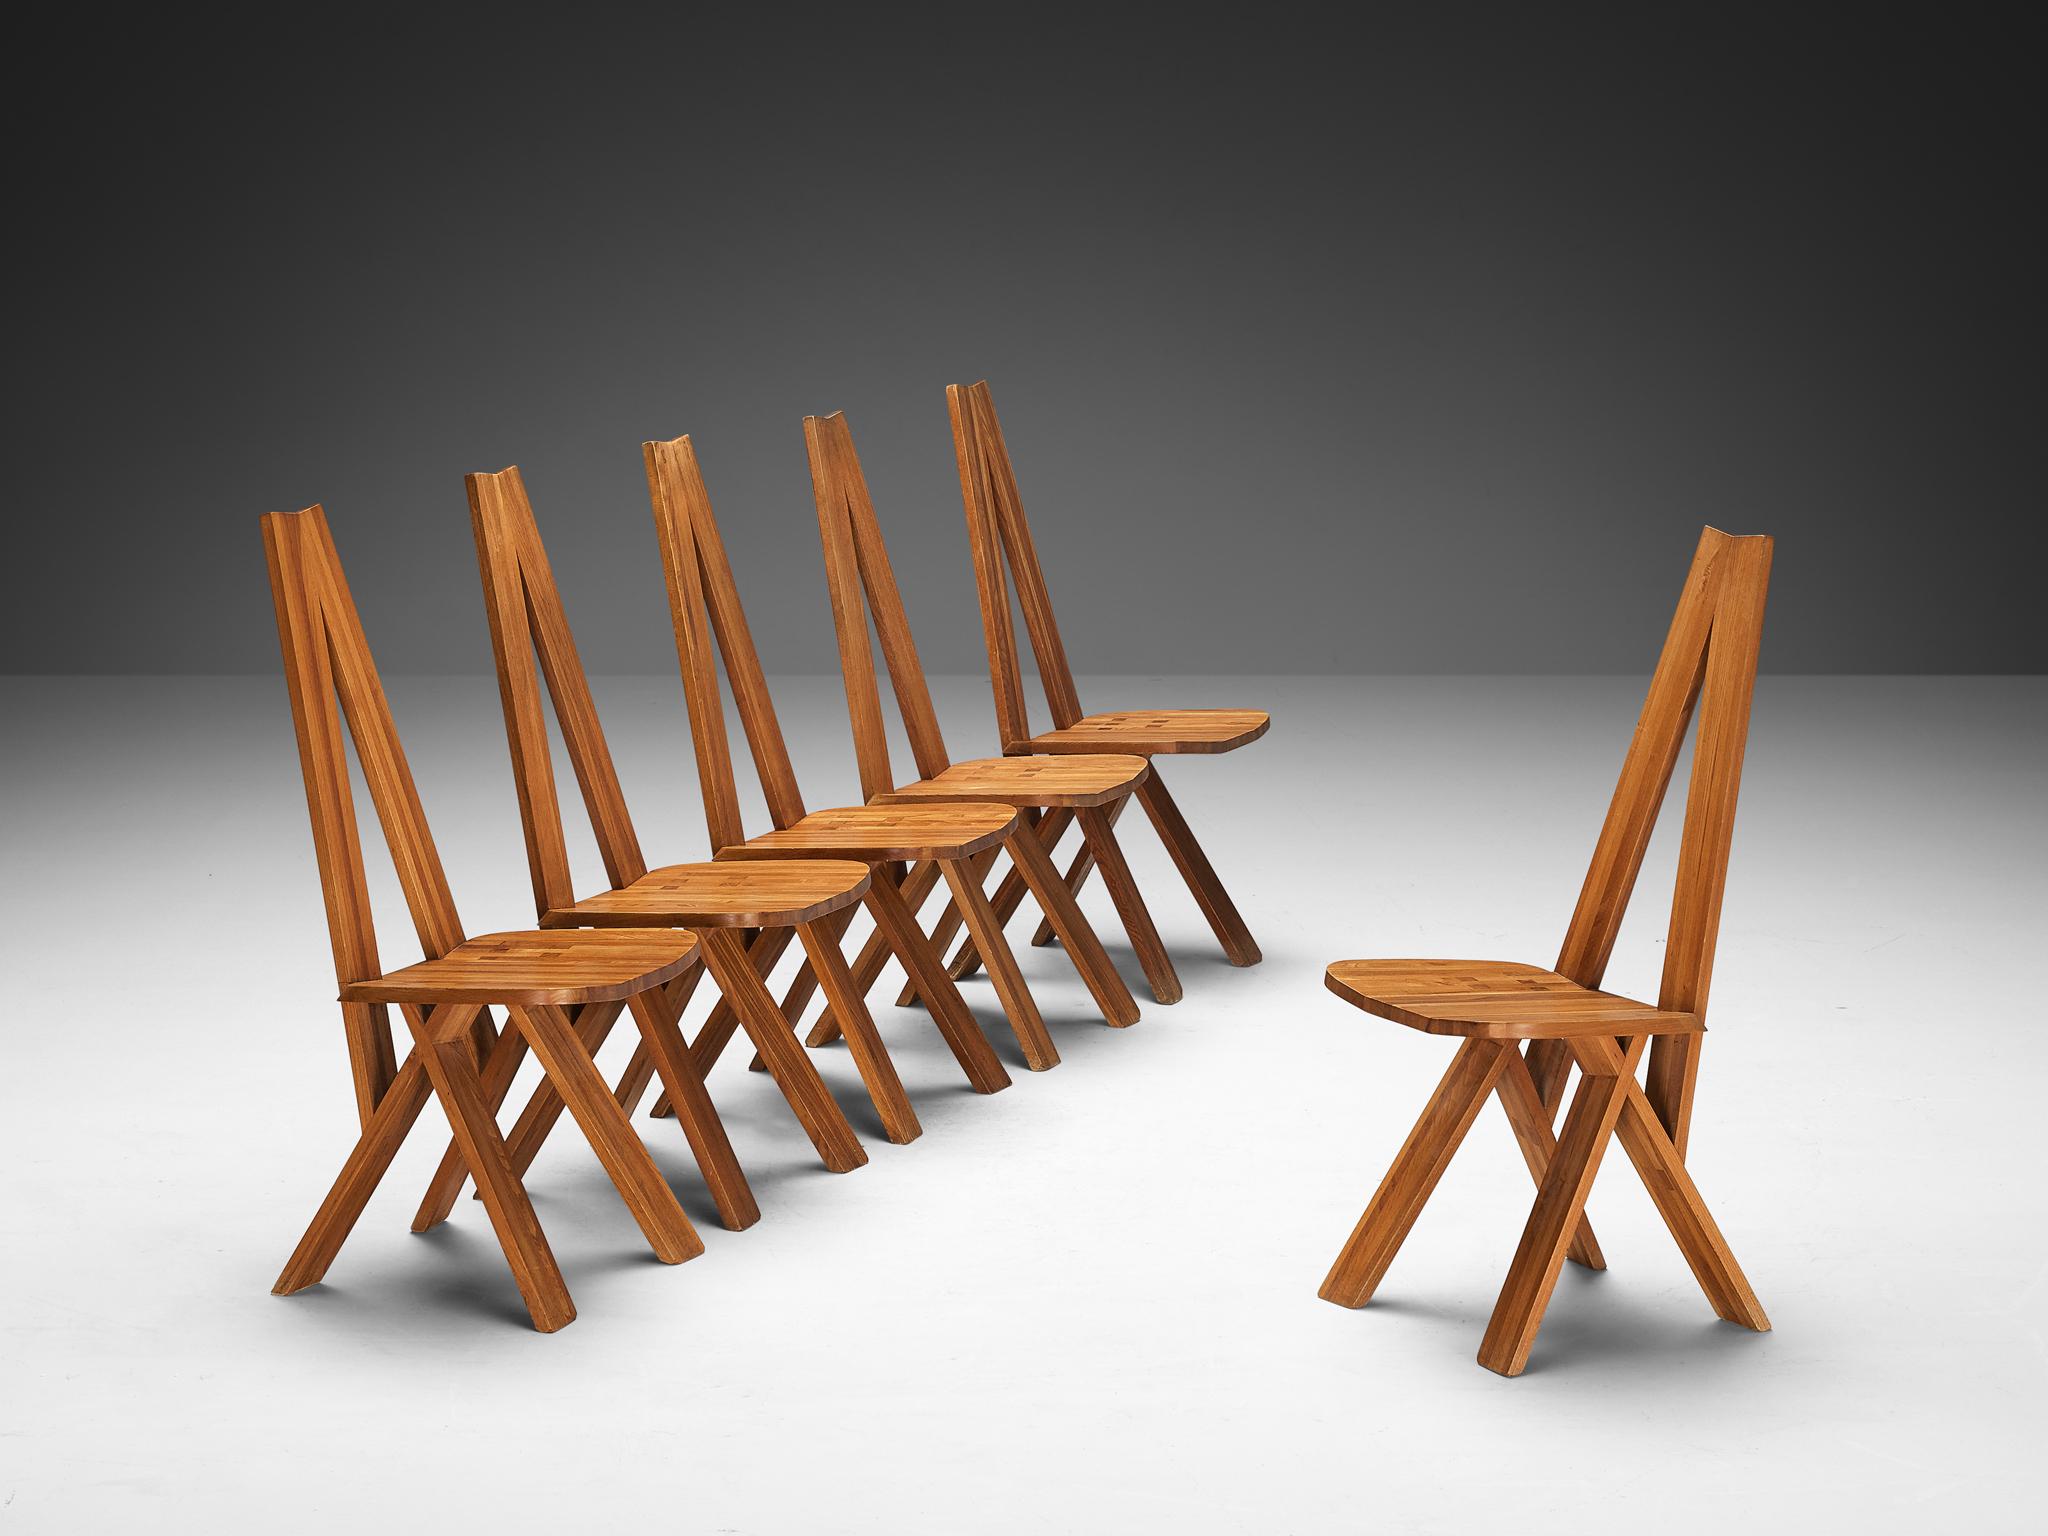 Pierre Chapo, set of six 'S45' or 'Chlacc' chairs, elm, France, design 1979

This 'S45' dining chair, also known as the 'Chlacc' chair is designed by Pierre Chapo. These chairs are executed in elm wood. The 'S45' chair is a part of the 'Chlacc'